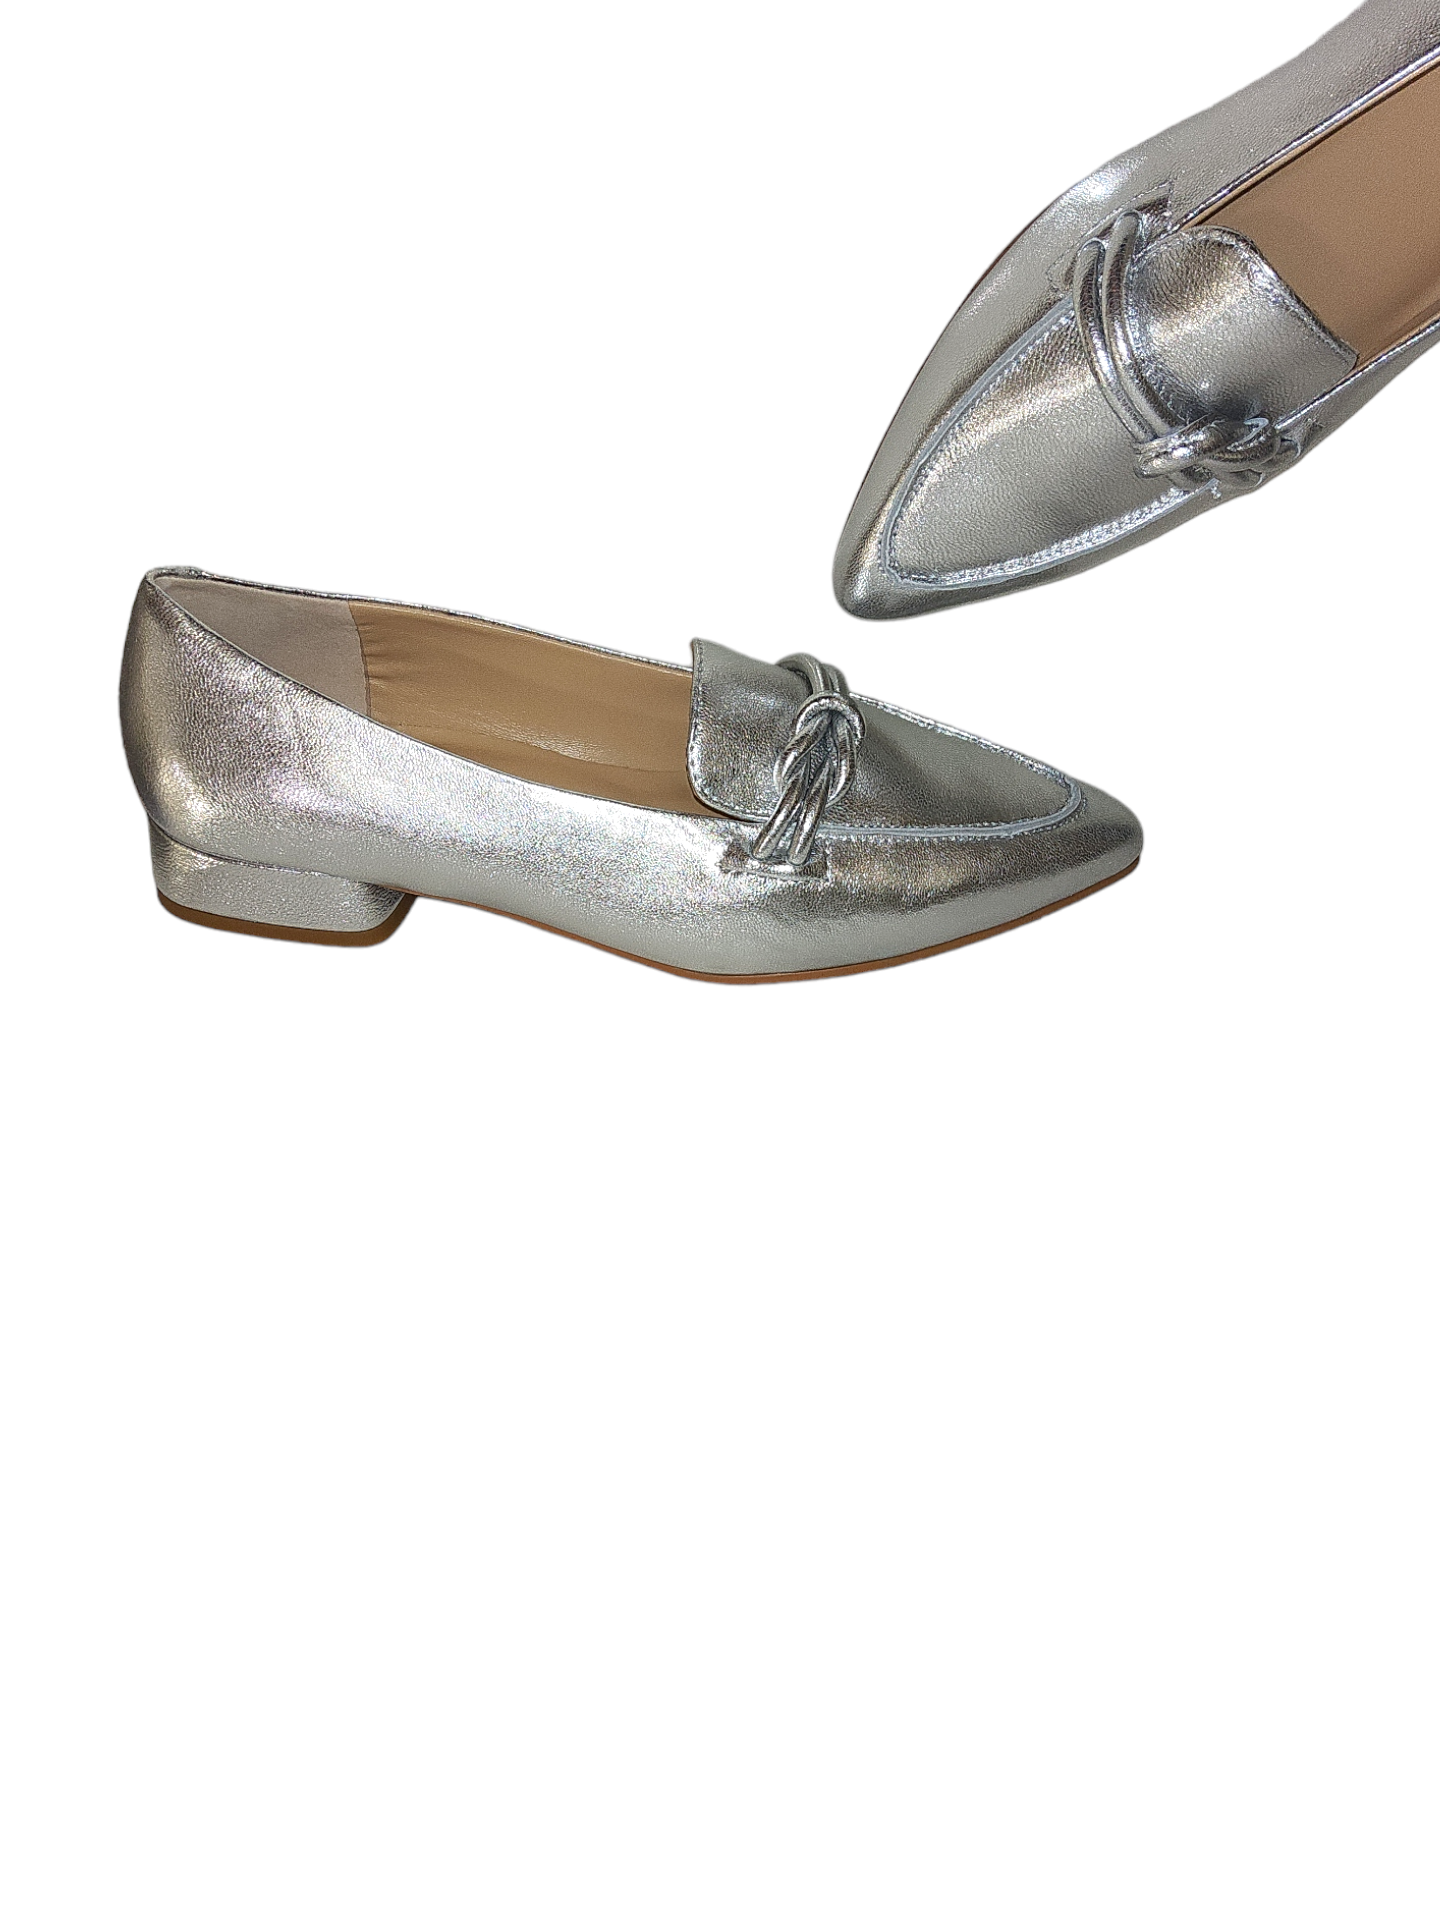 Silver leather shoe